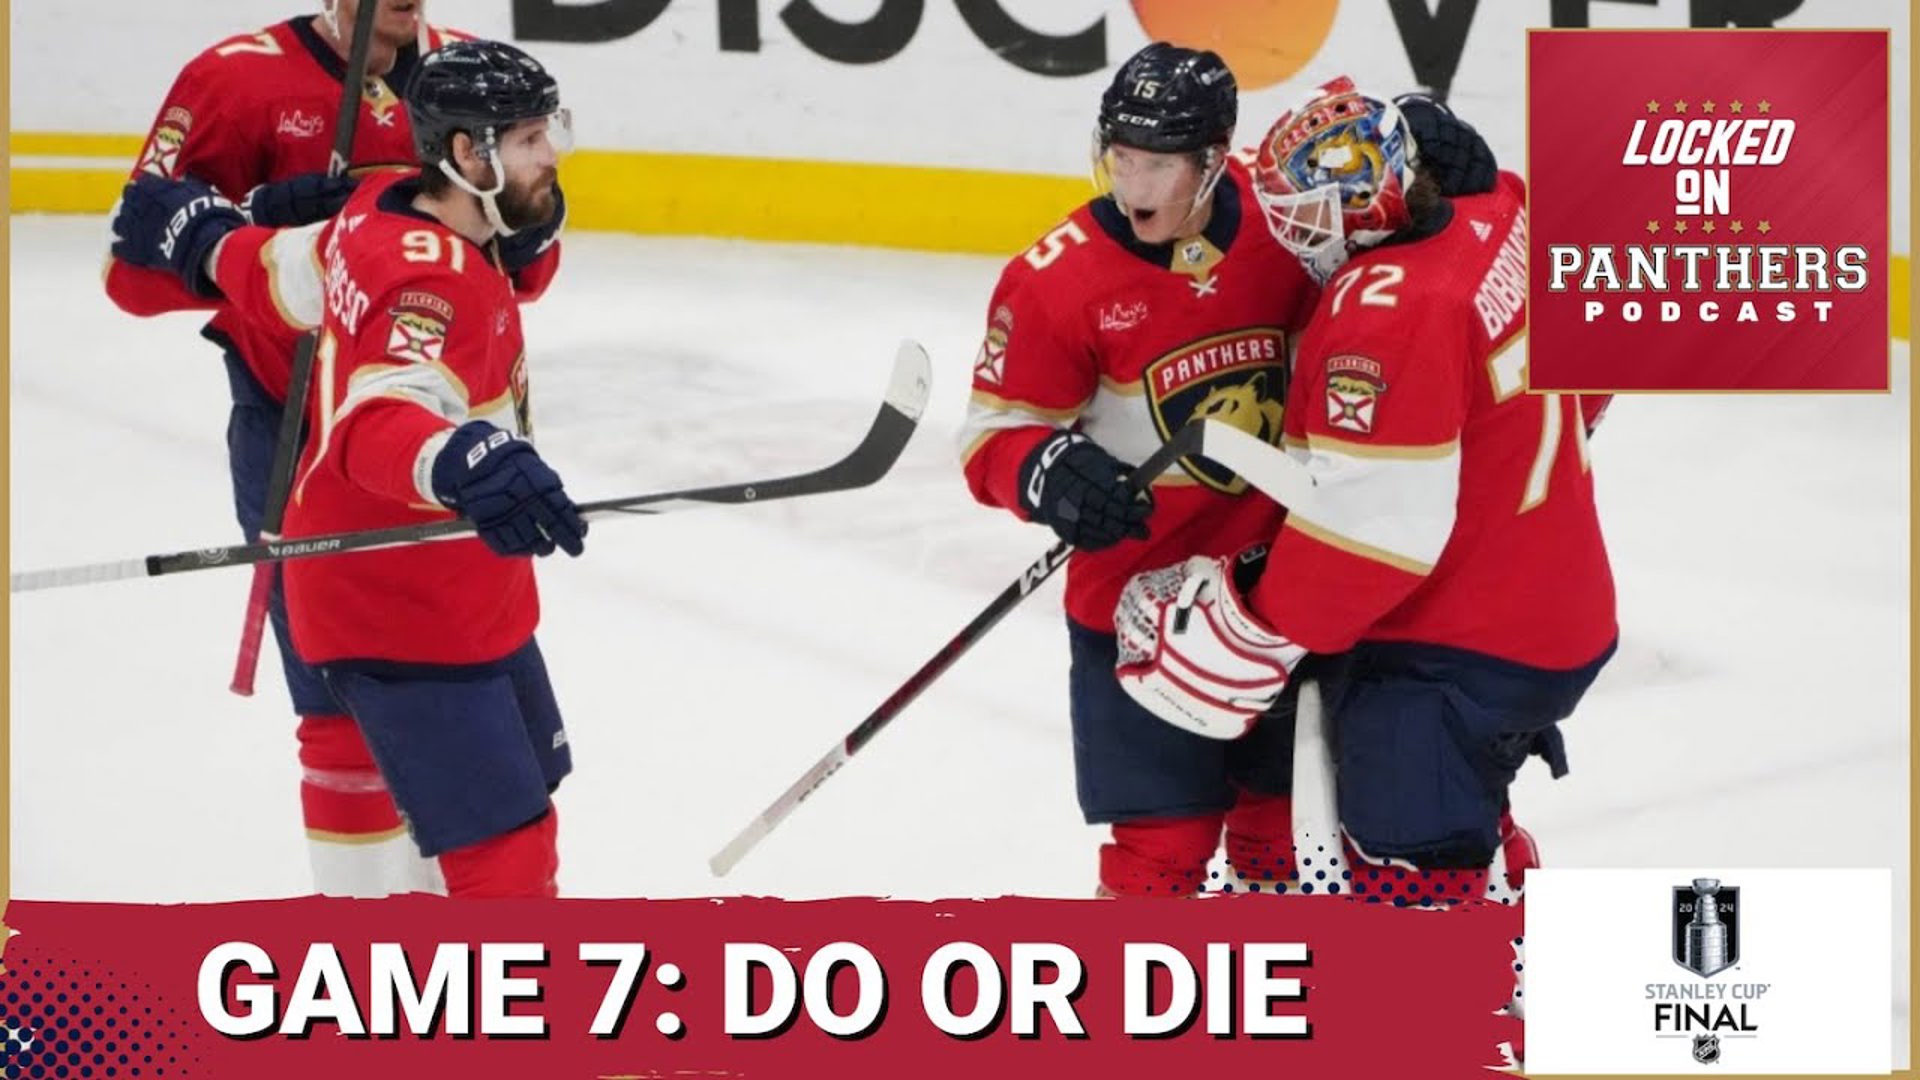 On today's edition of the Locked on Florida Panthers Podcast, Armando Velez is here to preview Game 7 of the Stanley Cup Final.